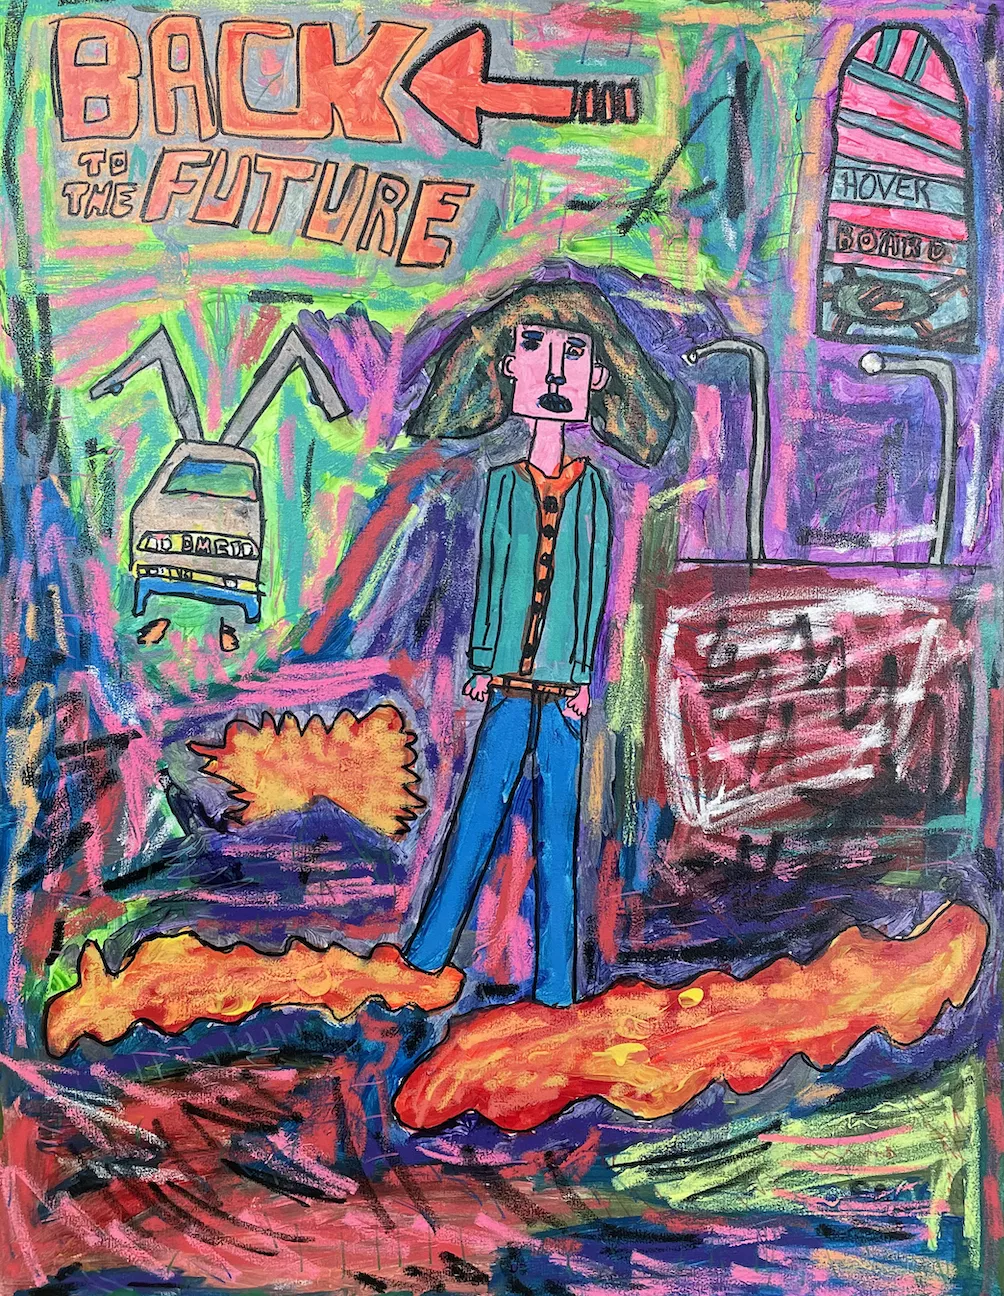 Darran Daughty Back to the Future, 2022 A colorful painting includes Michael J Fox, the DeLorean car, and hoverboard. The painting includes the text Back to the Future.  Mixed media on canvas, 48” x 36”